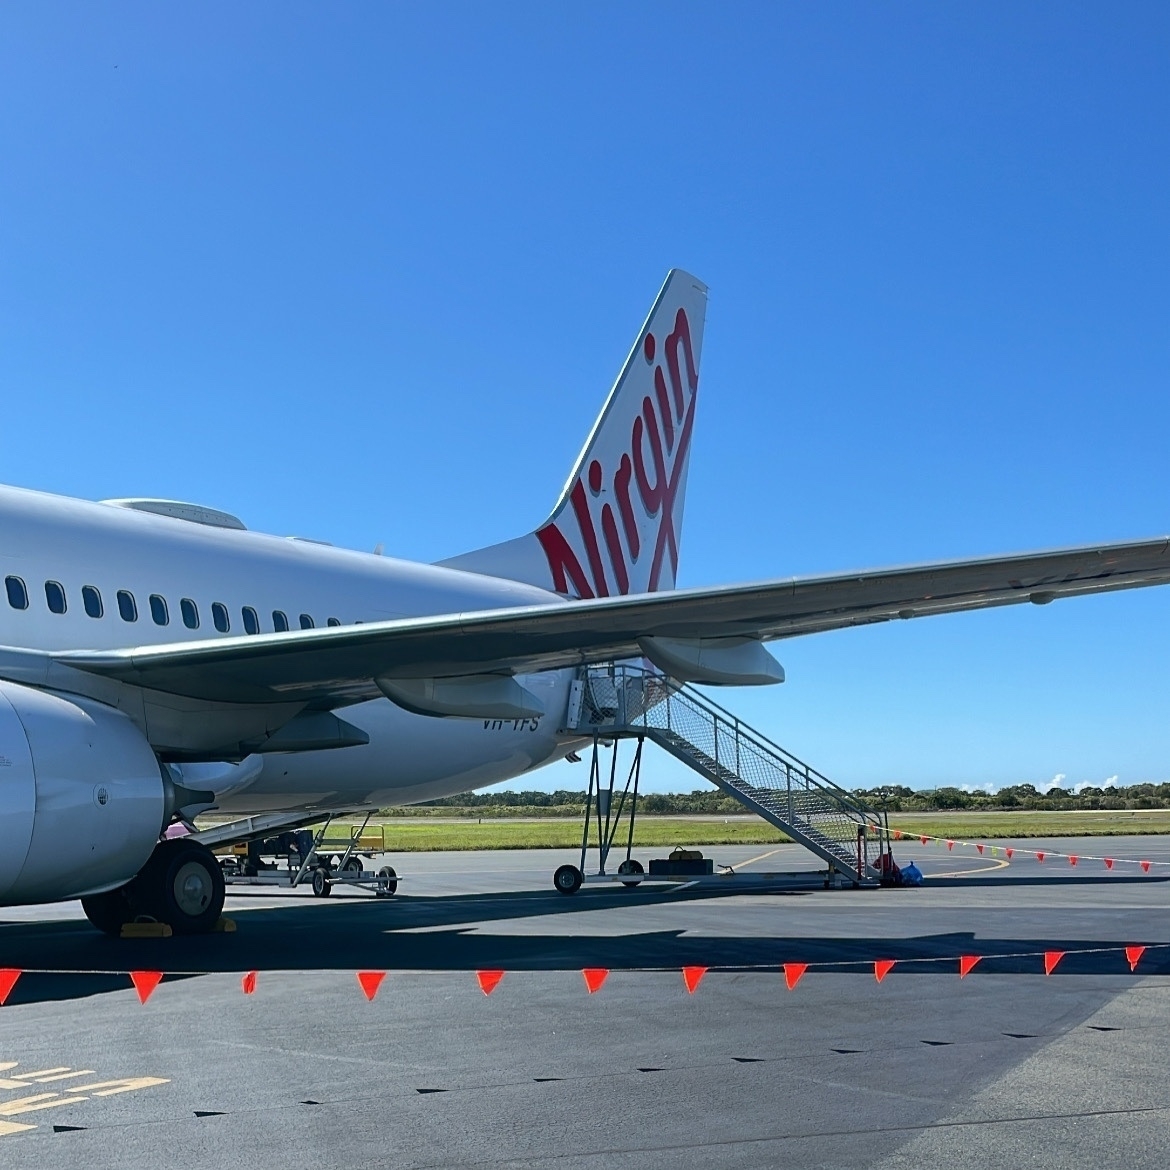 A Virgin Australia plane on the tarmac. 'Virgin' painted in red on the tail. A clear blue sky in the background.